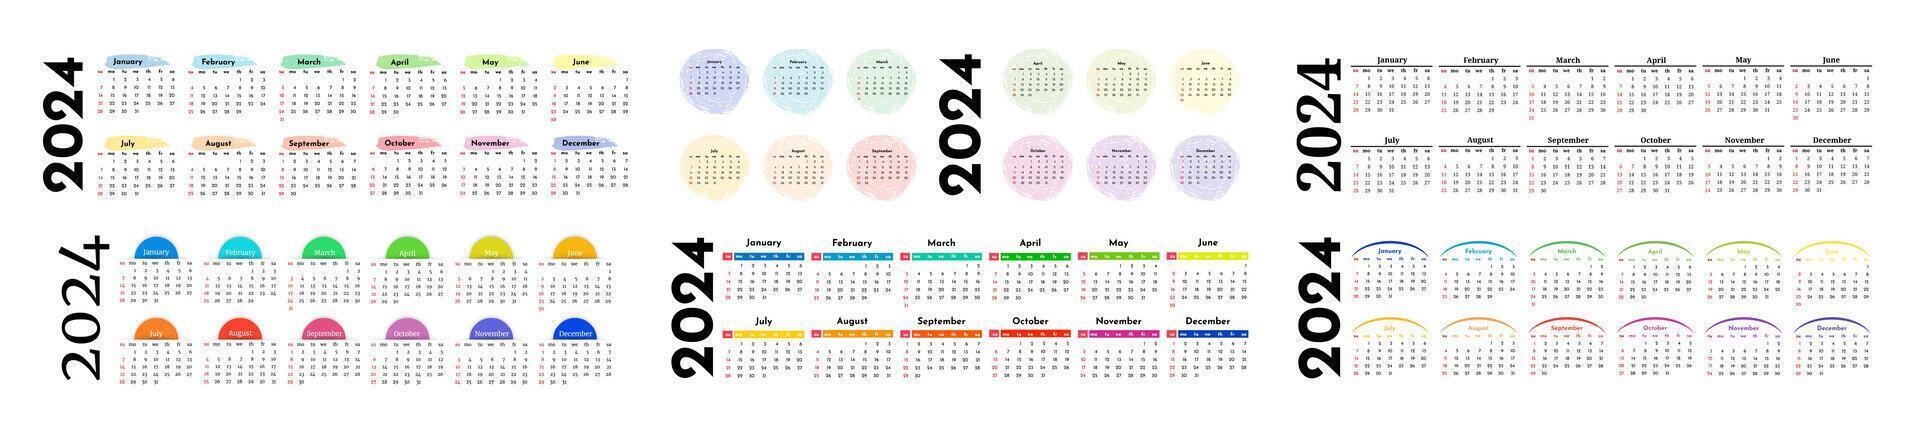 Calendar for 2024 isolated on a white background vector